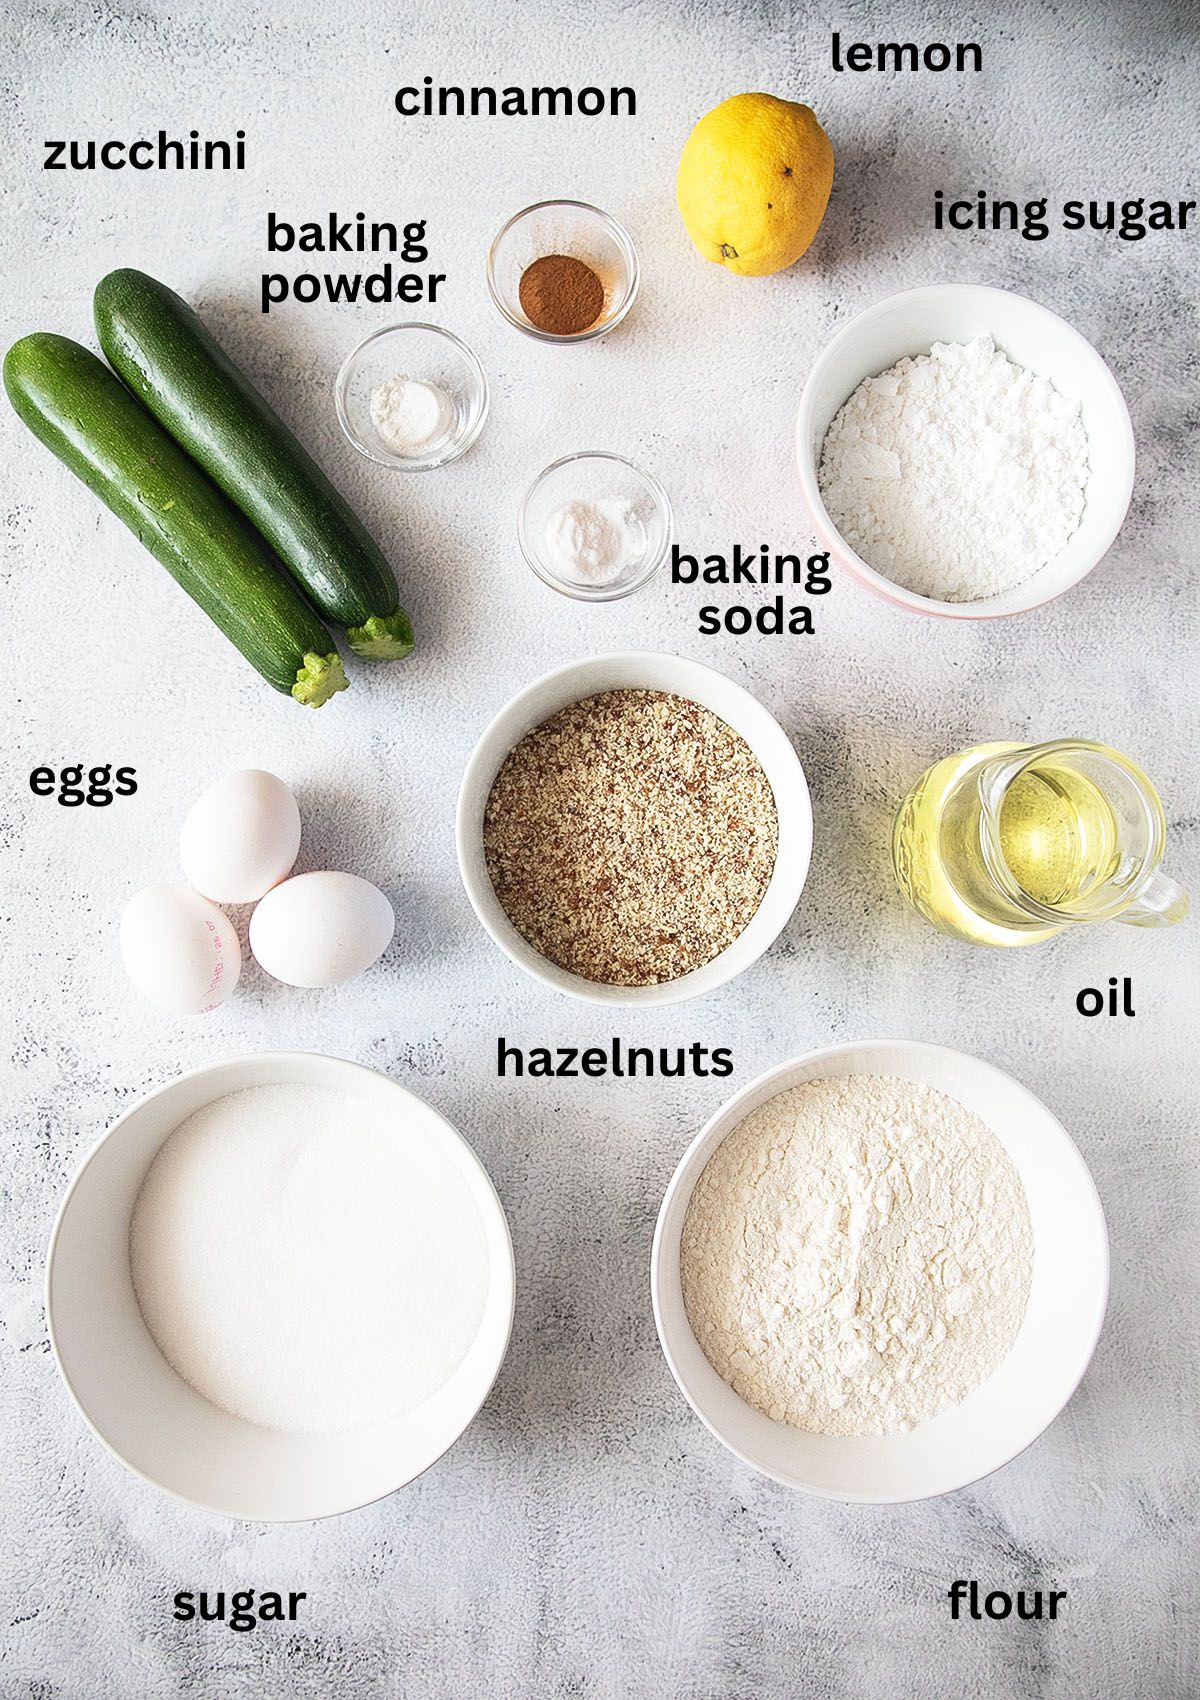 listed ingredients for making a bundt cake with zucchini and powdered sugar glaze.